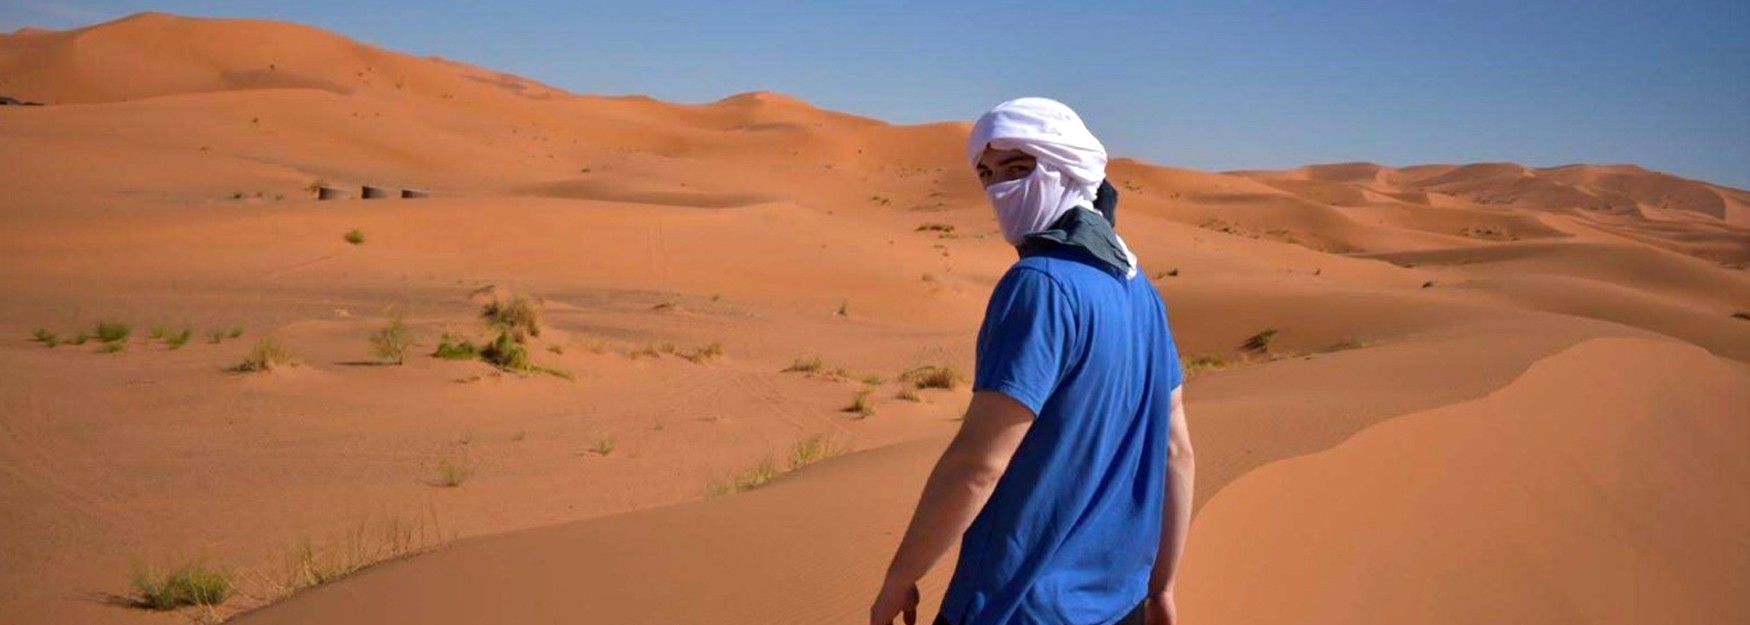 Devin Jozokos stands among the Sahara Desert, turned back to look at the camera